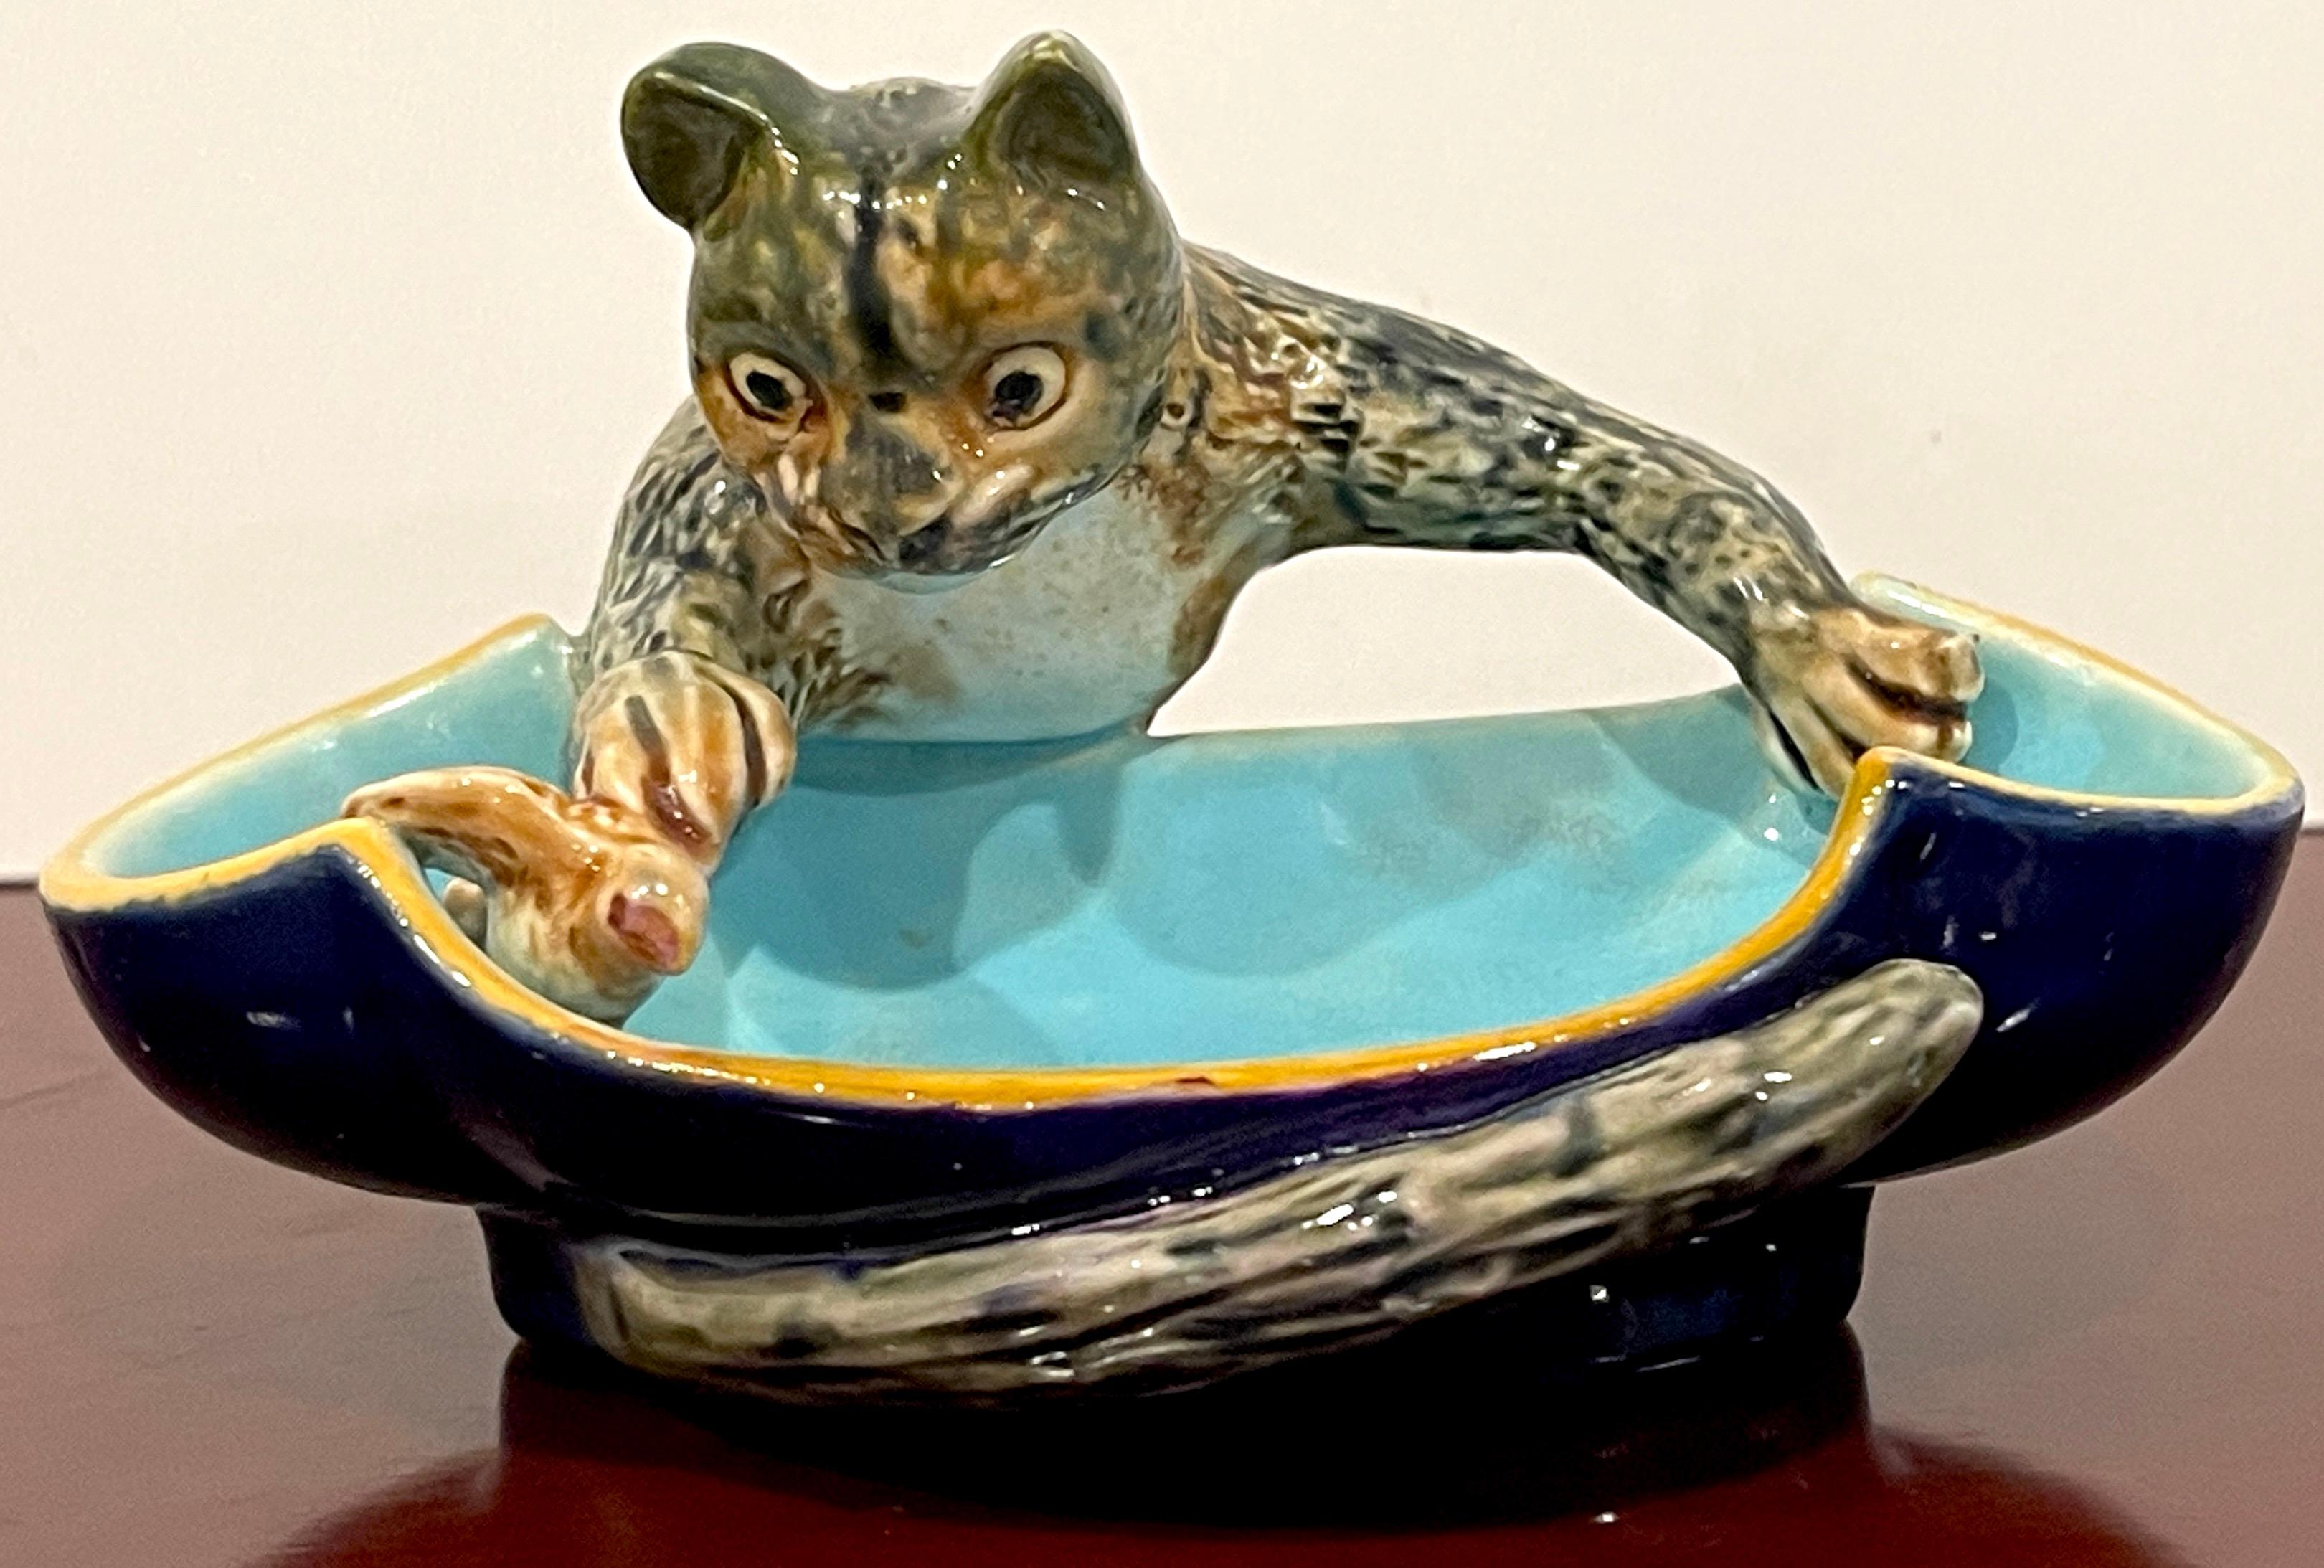 George Jones Aesthetic Majolica Cat & Bird Figural Dish, England, 1876
Registry Date marked for January 22, 1876

A truly exceptional piece of antique majolica pottery: the George Jones Aesthetic Majolica Cat & Bird Figural Dish, crafted in England